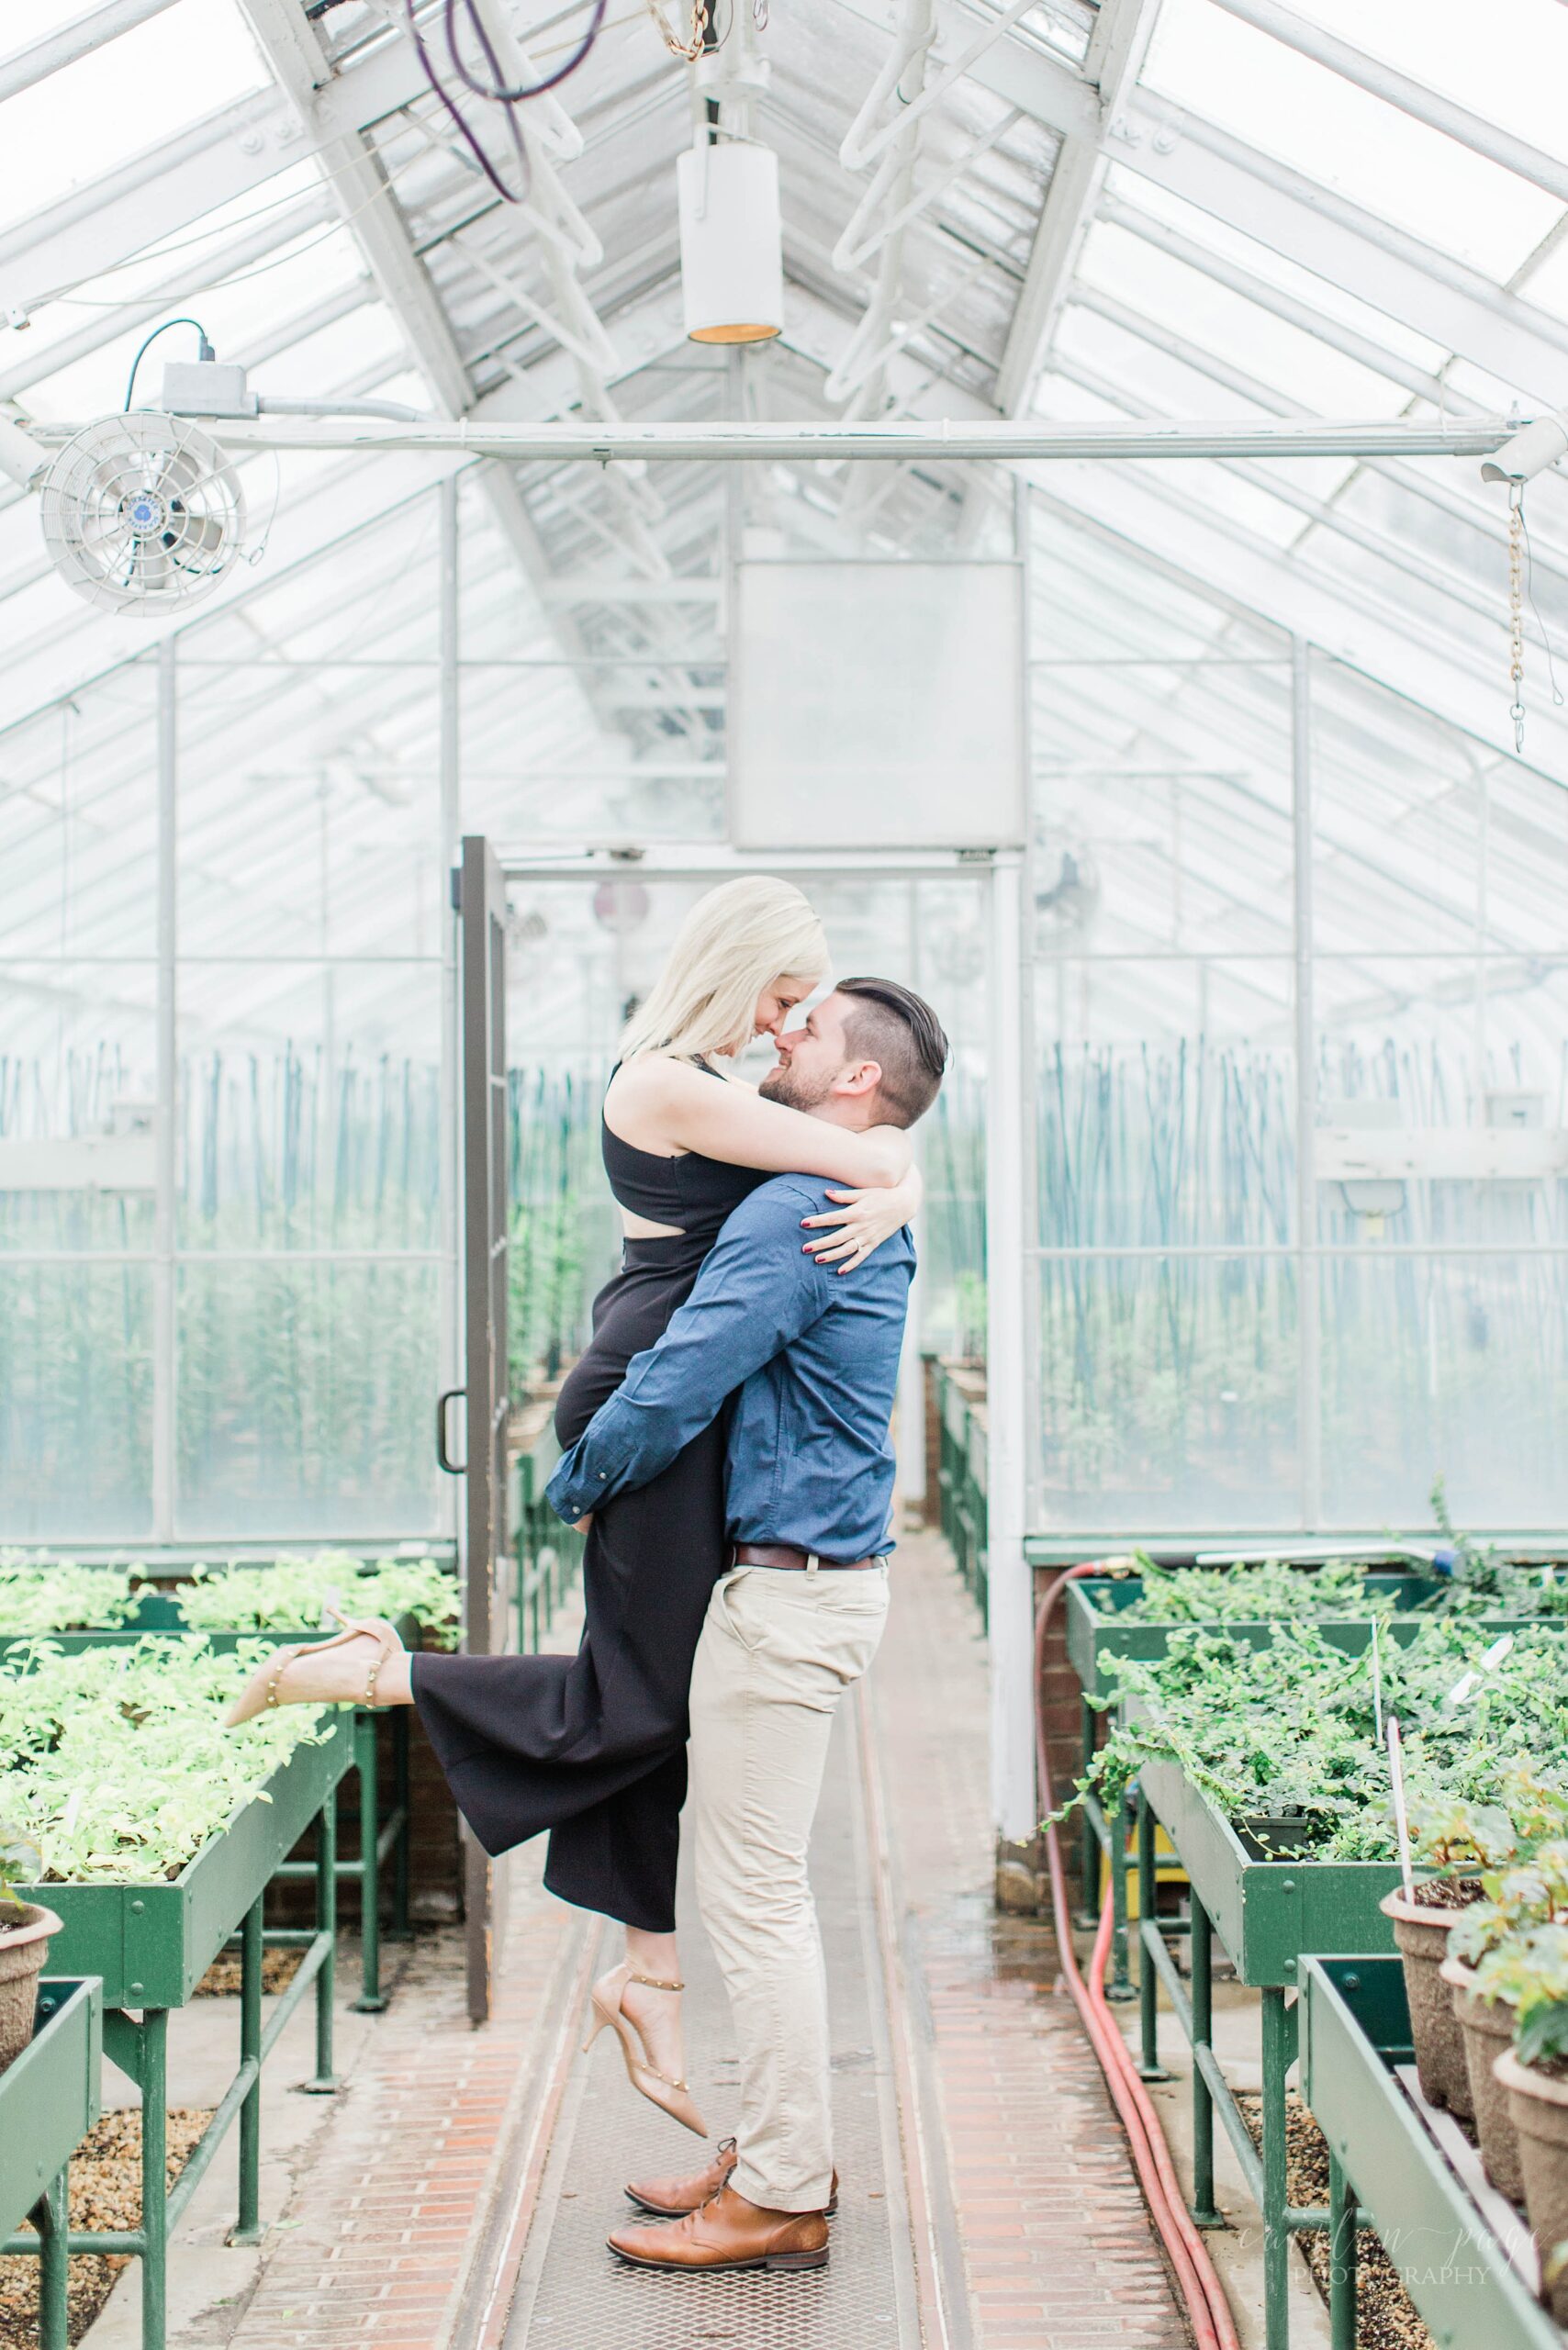 Man picking woman up in a greenhouse at Longwood Gardens